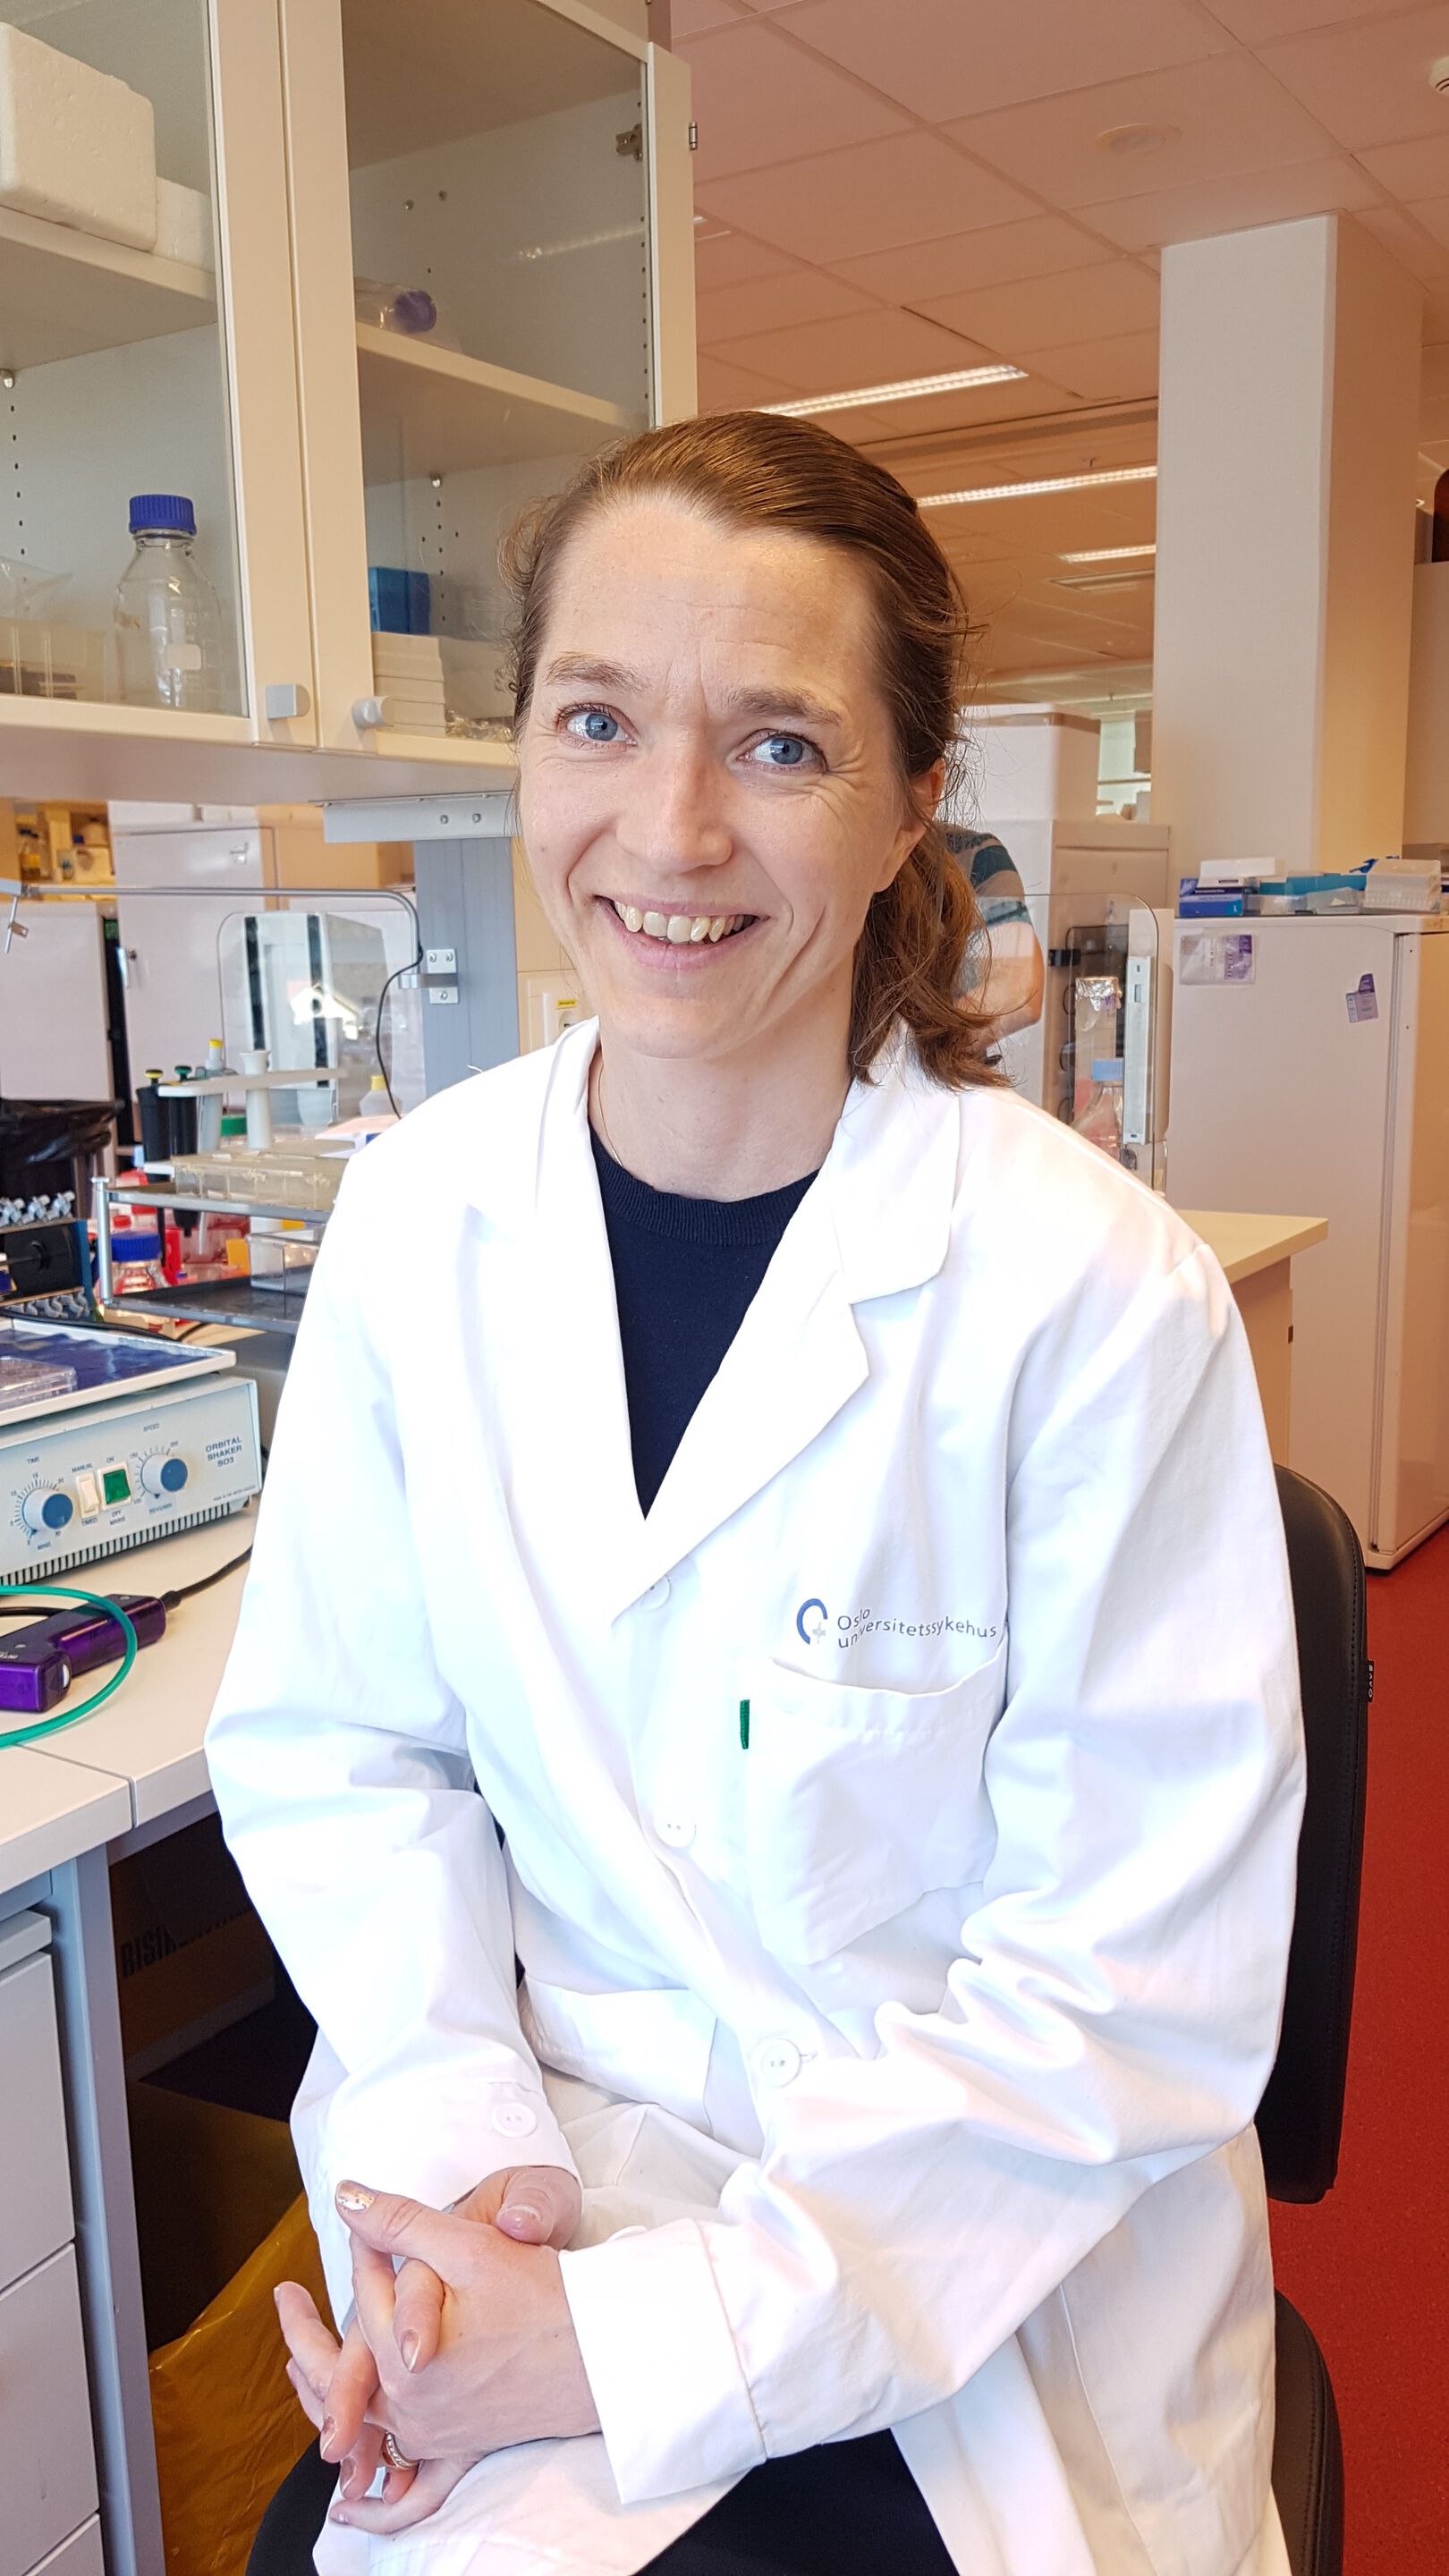 Kaisa Haglund is a project leader in Harald Stenmark' group Cancer Membrane Dynamics